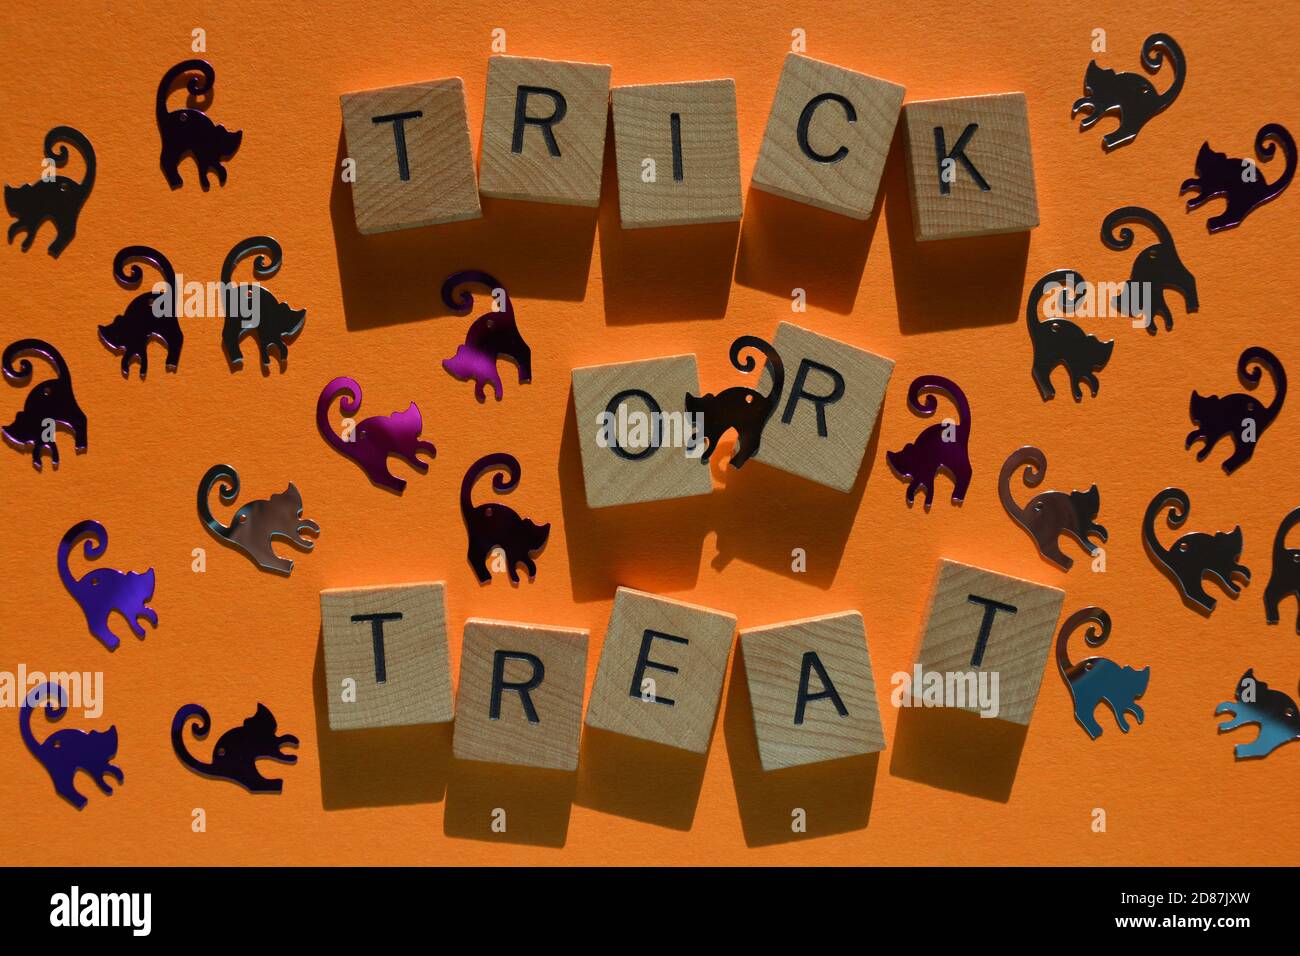 Trick or Treat in wood alphabet letters surround by Halloween themed cat shapes Stock Photo